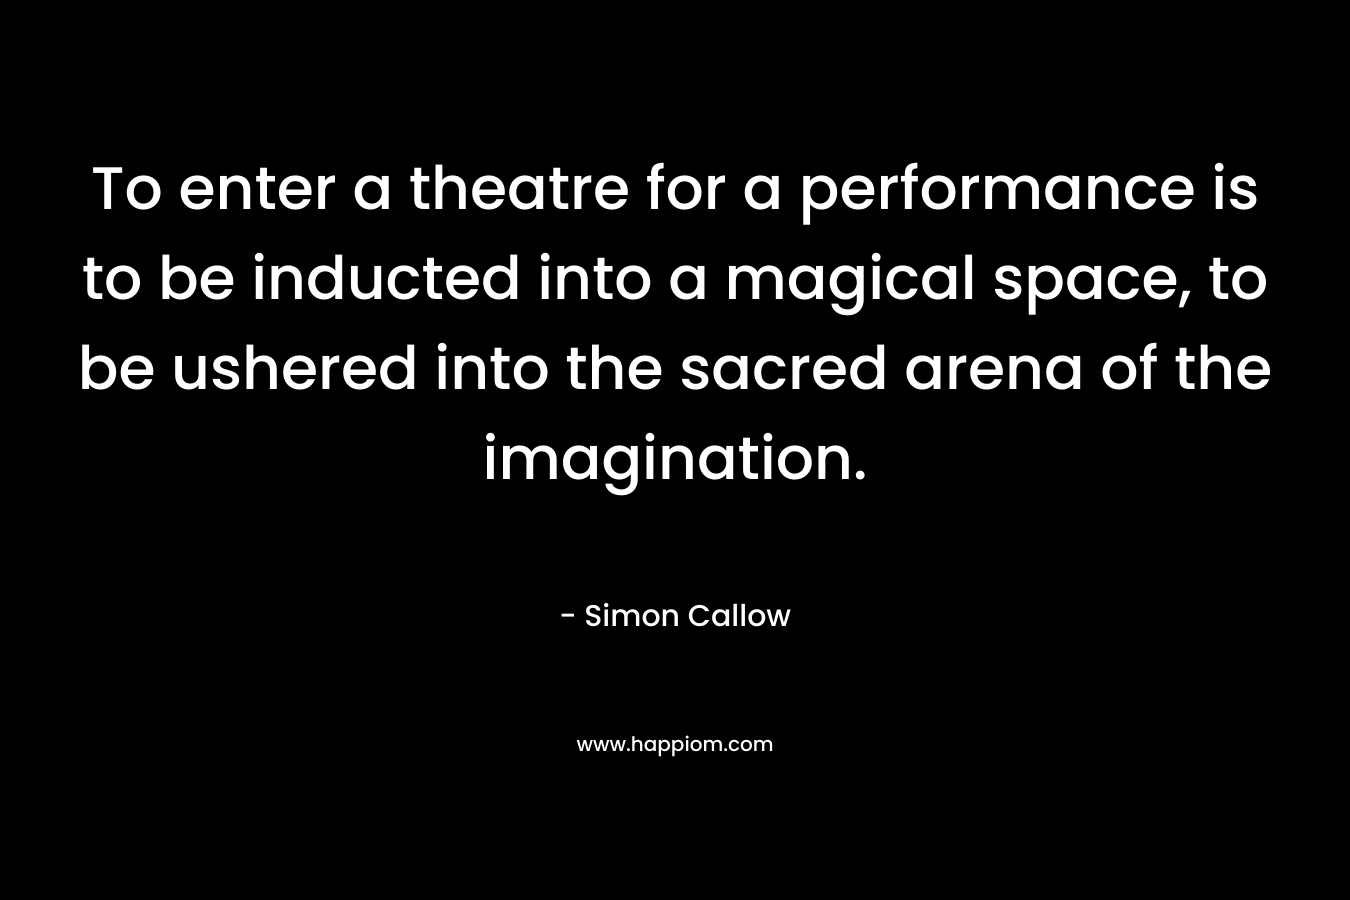 To enter a theatre for a performance is to be inducted into a magical space, to be ushered into the sacred arena of the imagination.